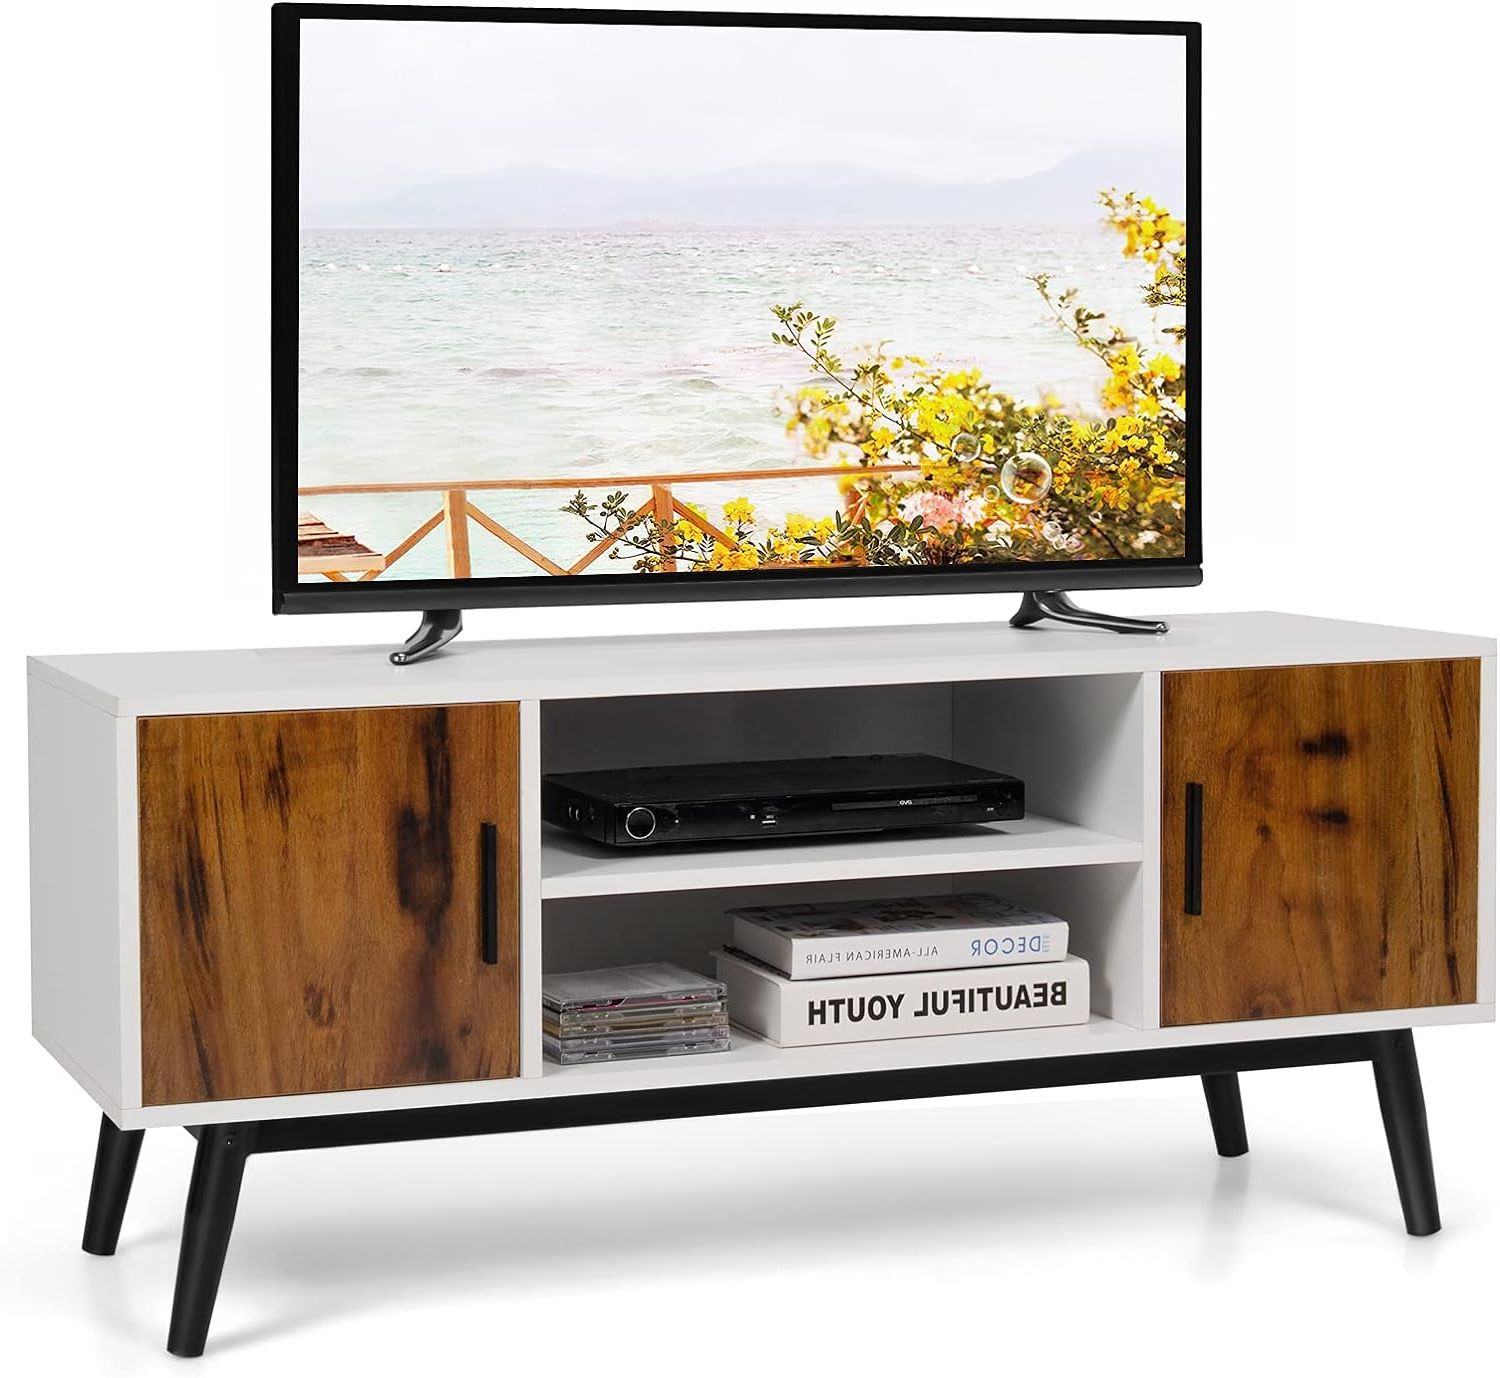 Tangkula 2 Door Tv Stand For Tvs Up To 55 Inch Tv, India | Ubuy In Tv Stands With 2 Doors And 2 Open Shelves (View 17 of 20)